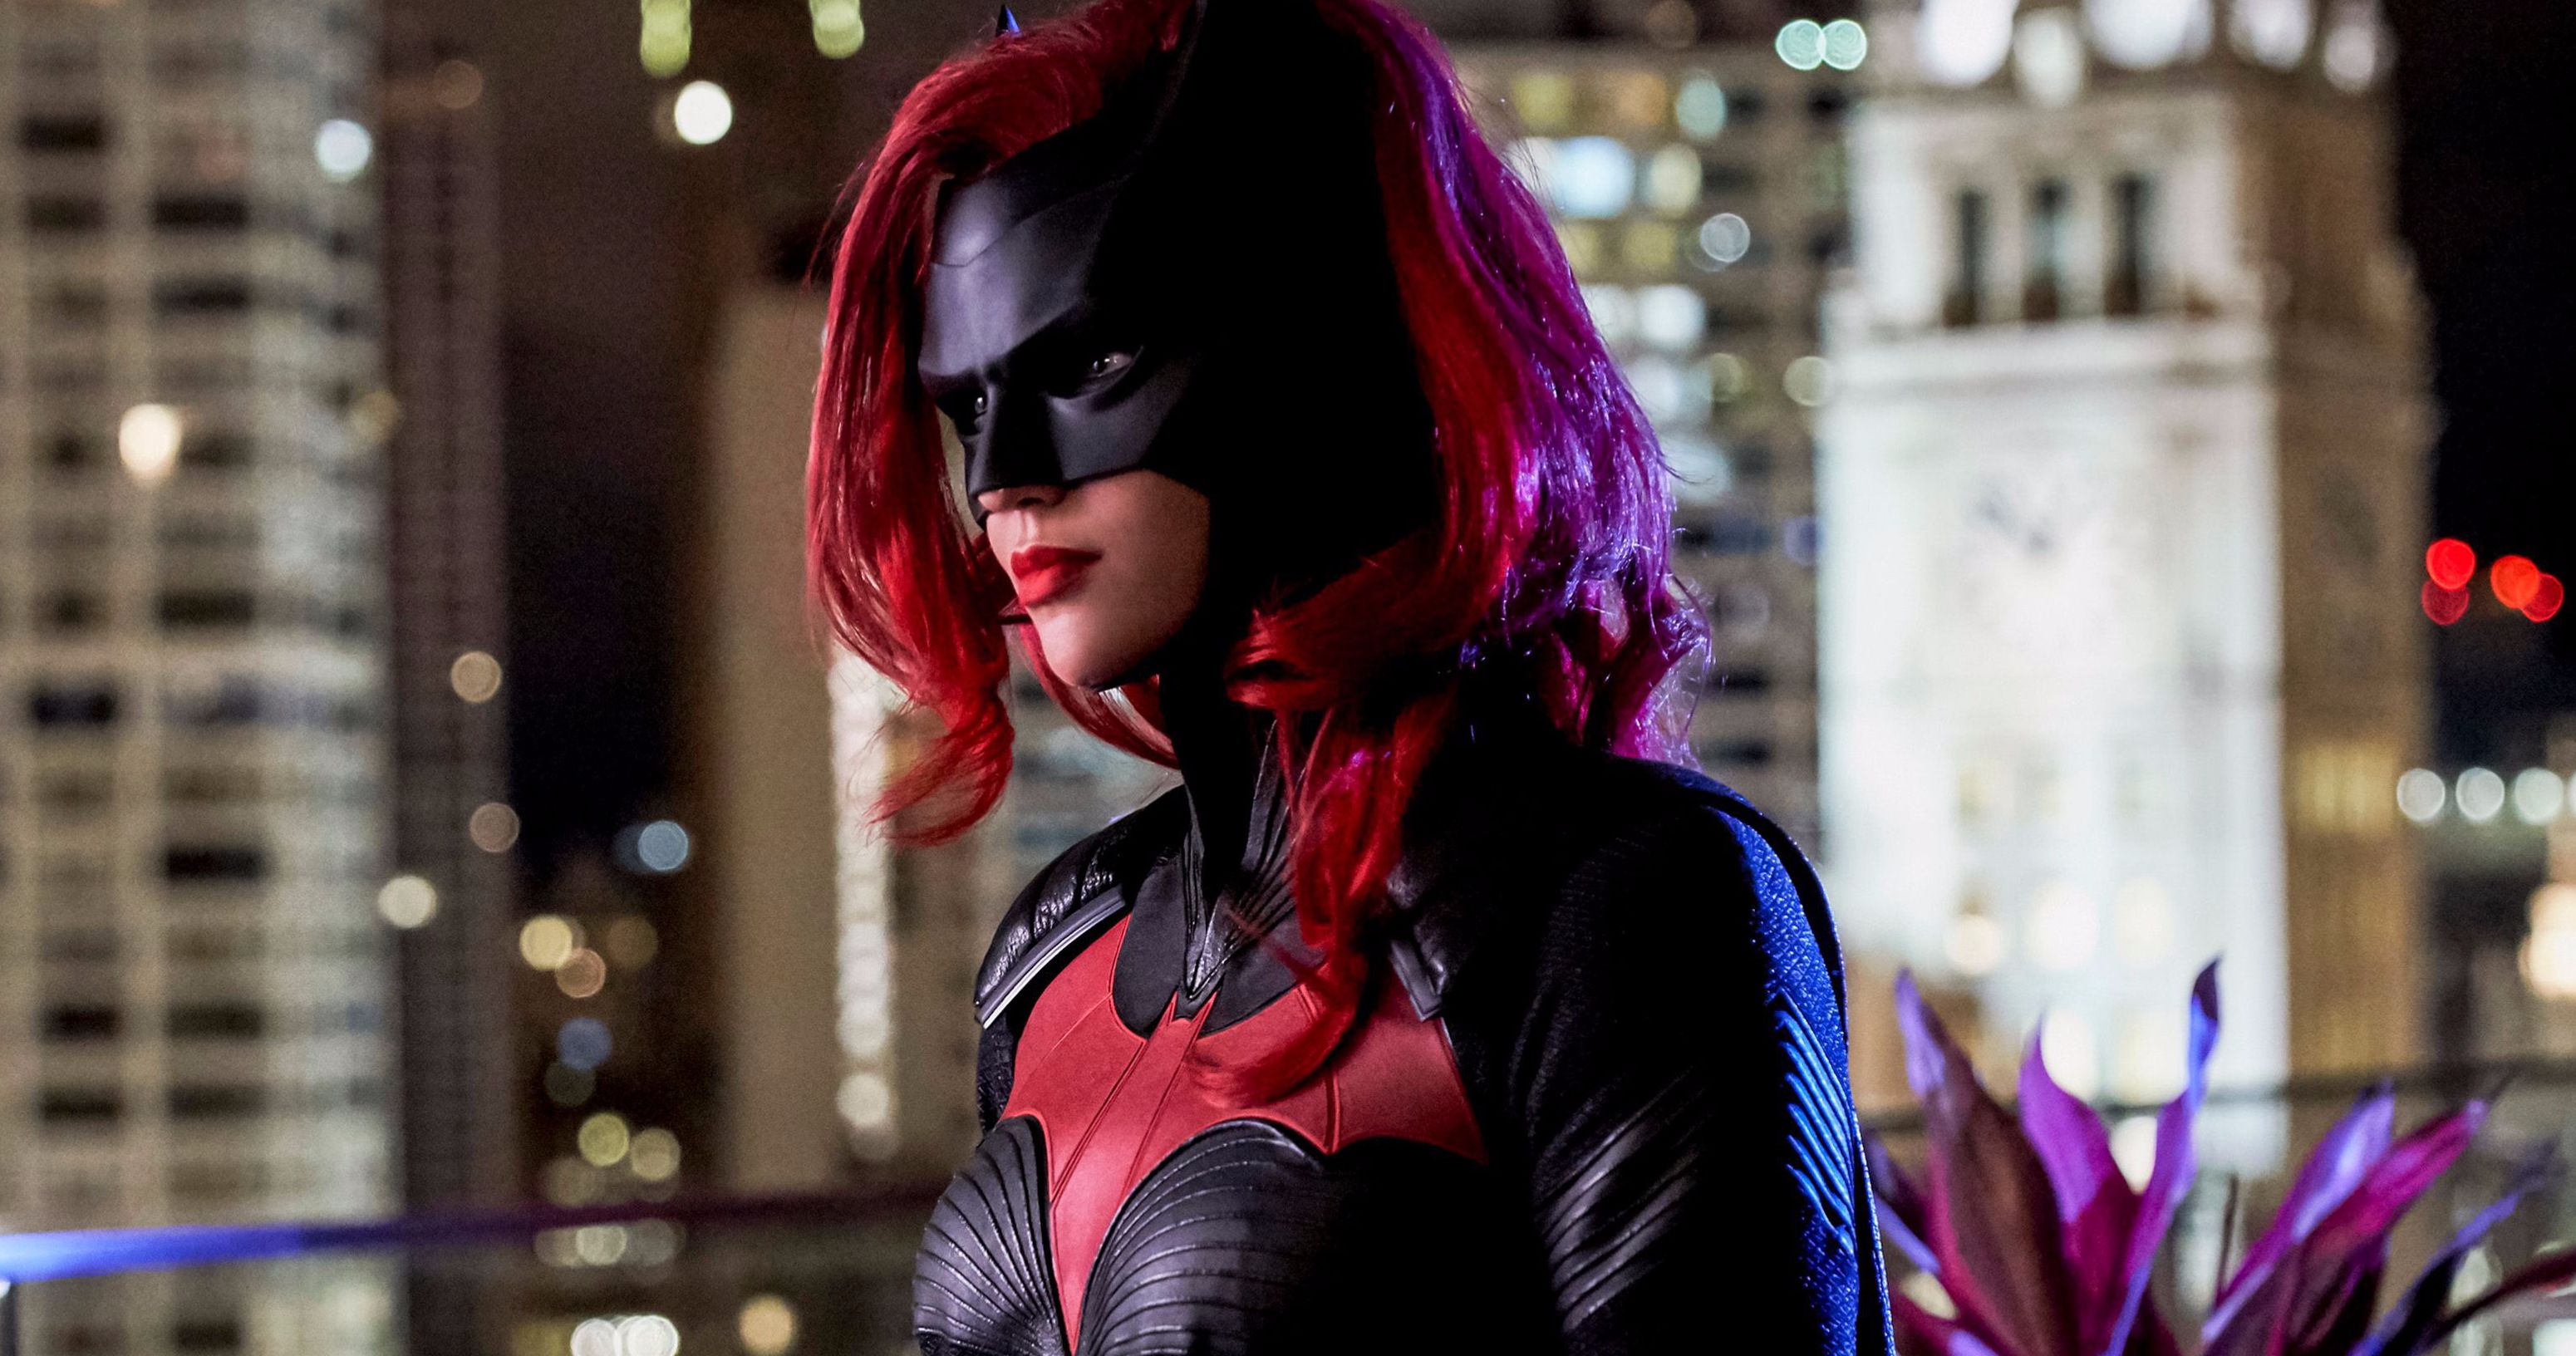 Ruby Rose's Batwoman Series Gets October Premiere Date on The CW